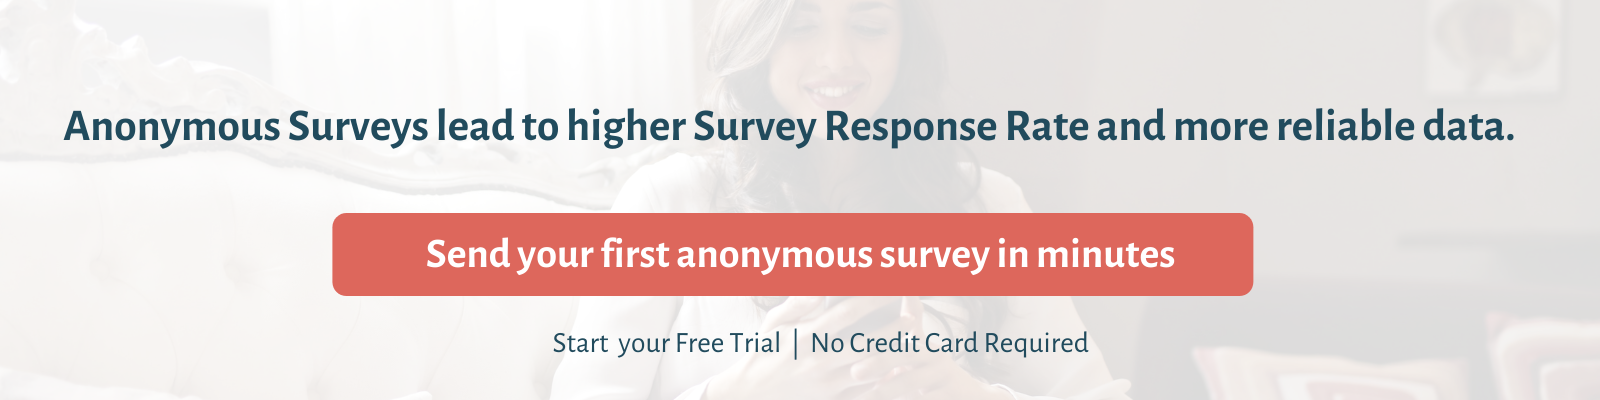 Send anonymous survey lead to higher survey response rate